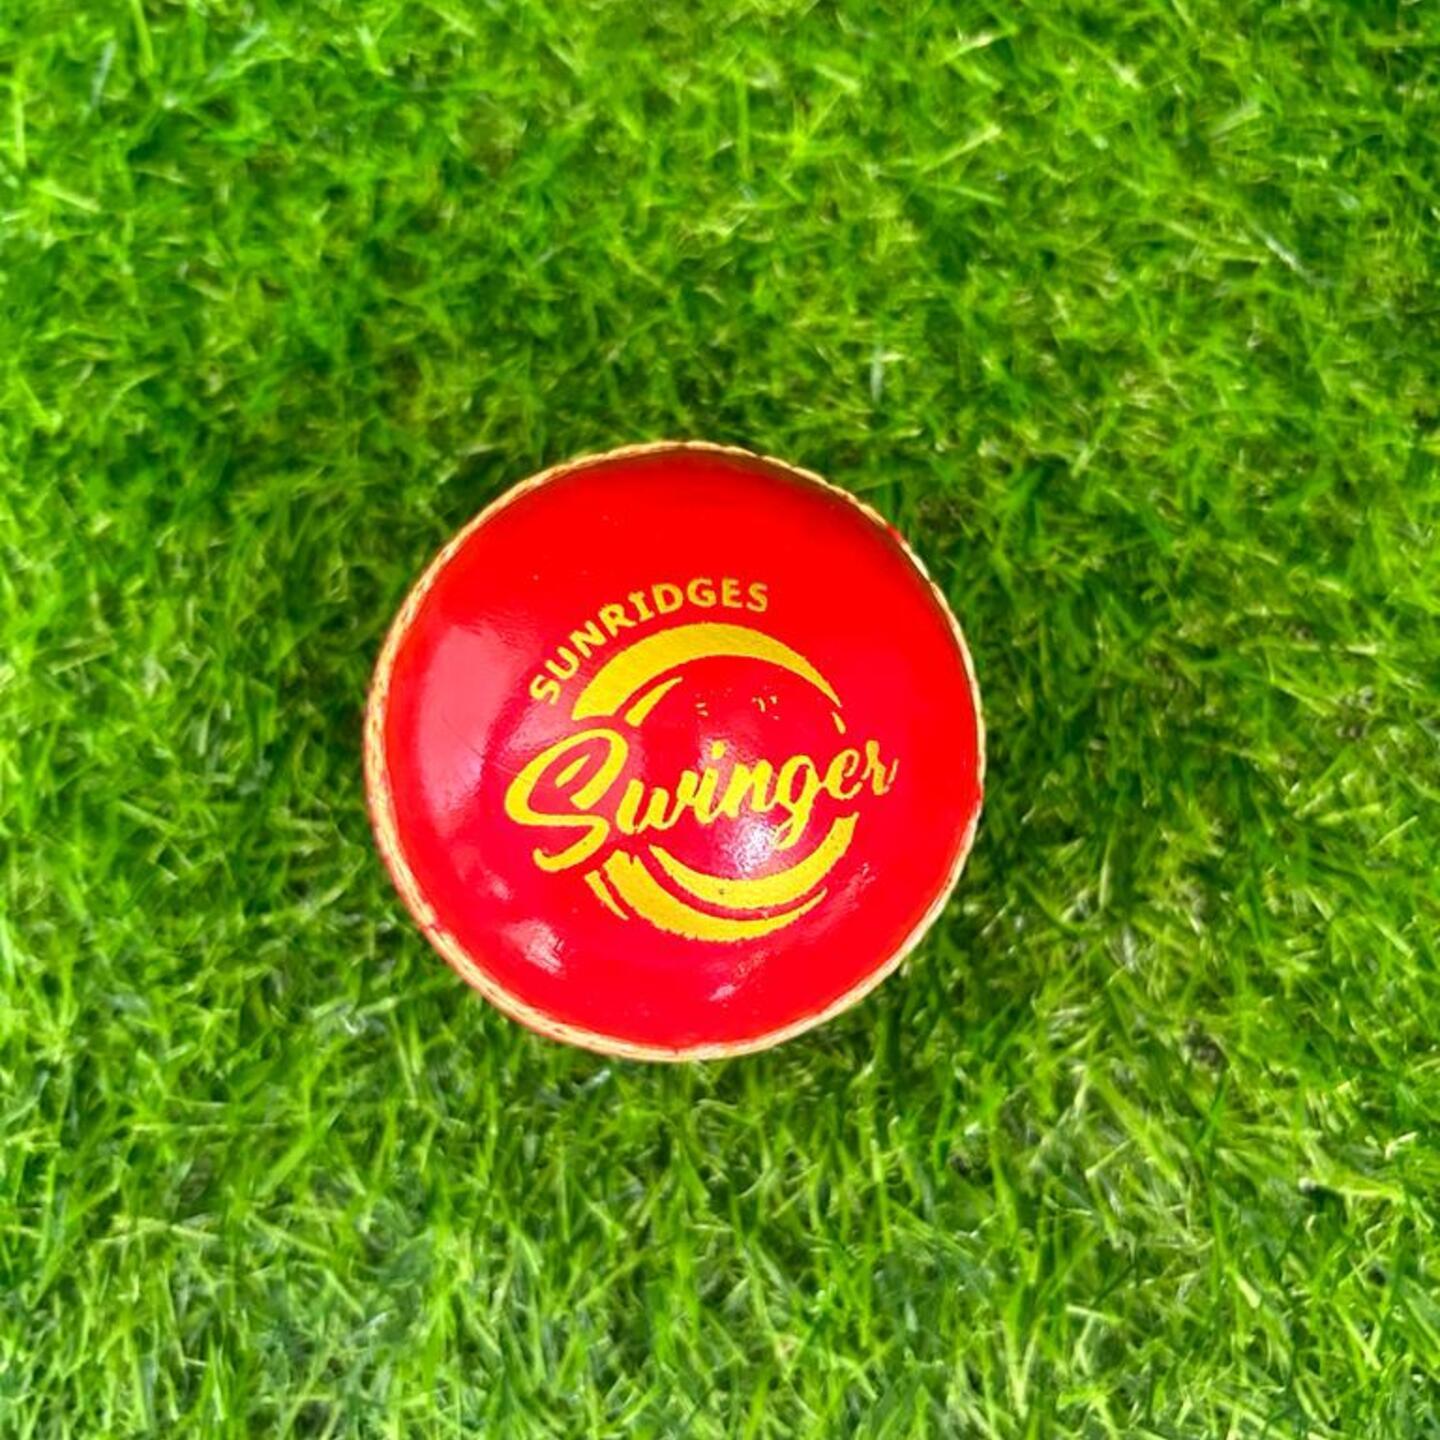 SS SWINGER LEATHER CRICKET BALL  2 PC. RED CRICKET BALL